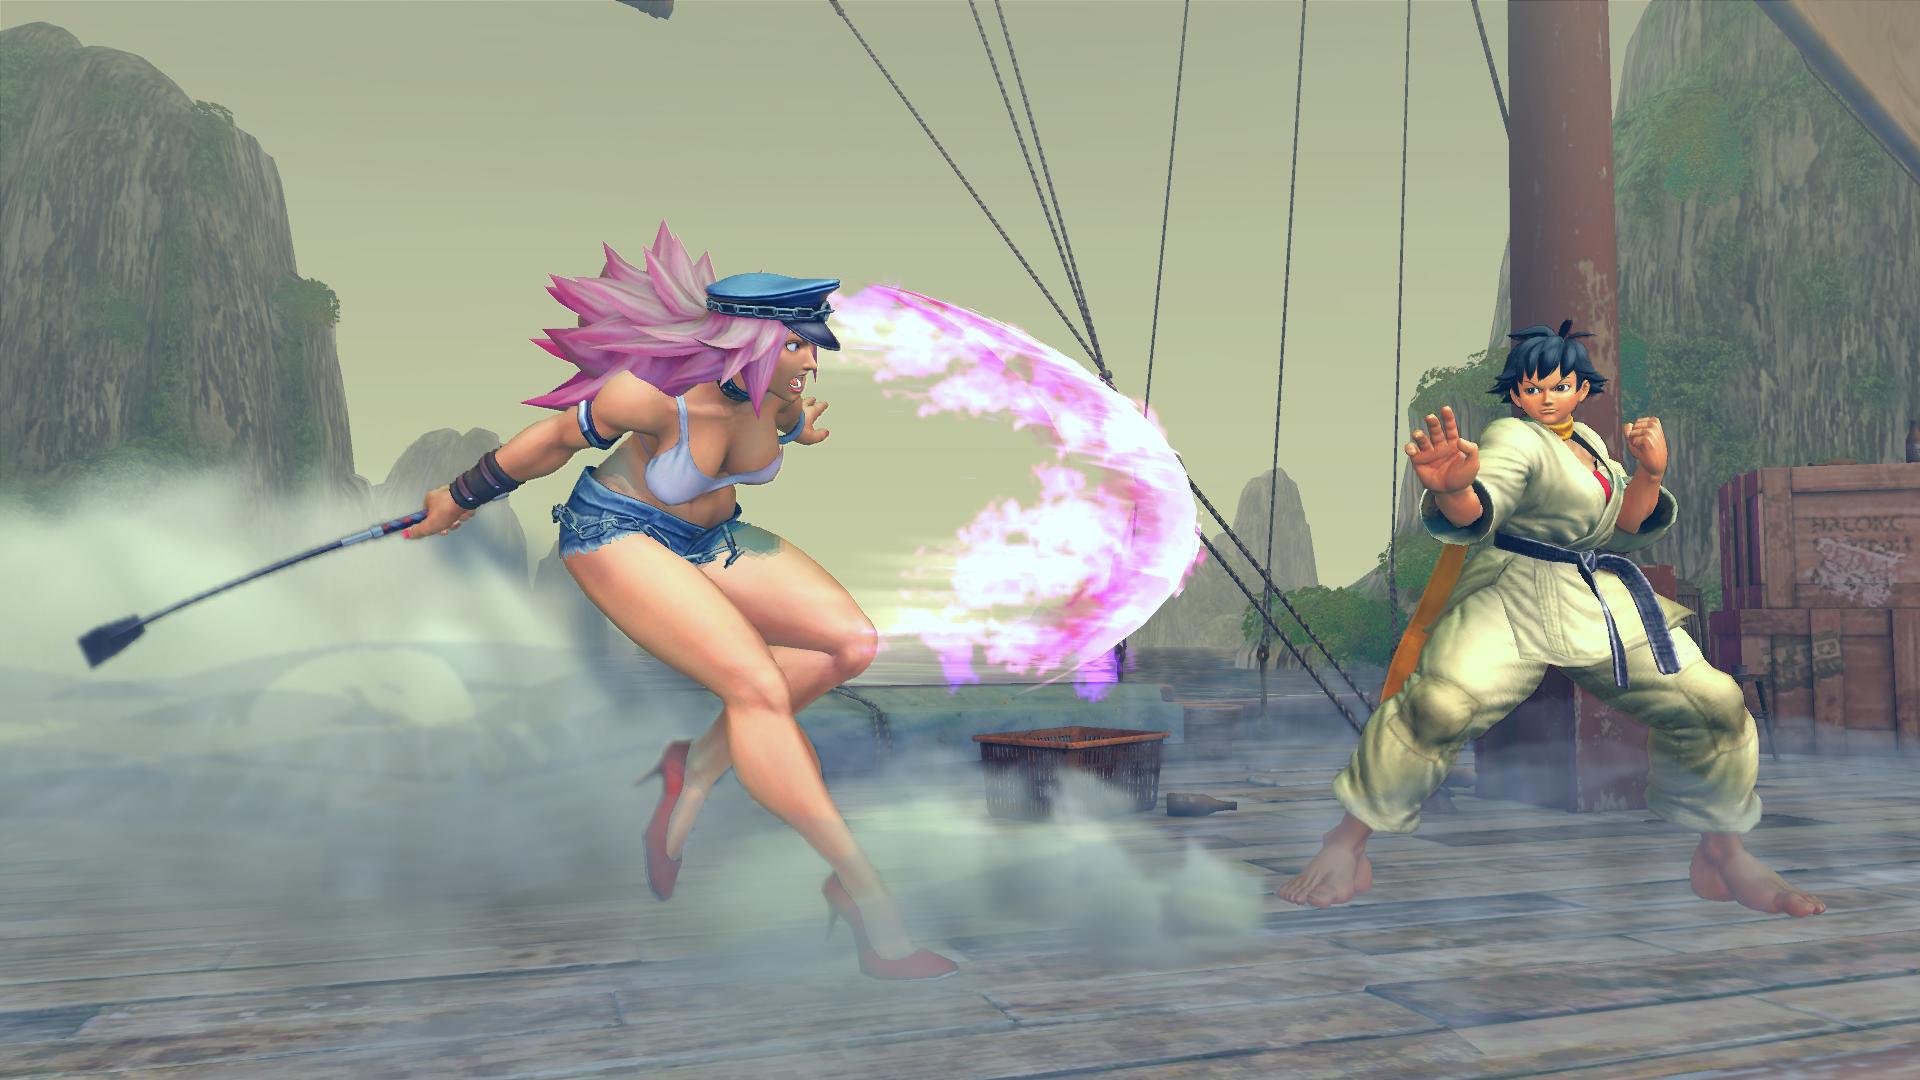 Ultra Street Fighter IV System Requirements - Can I Run It